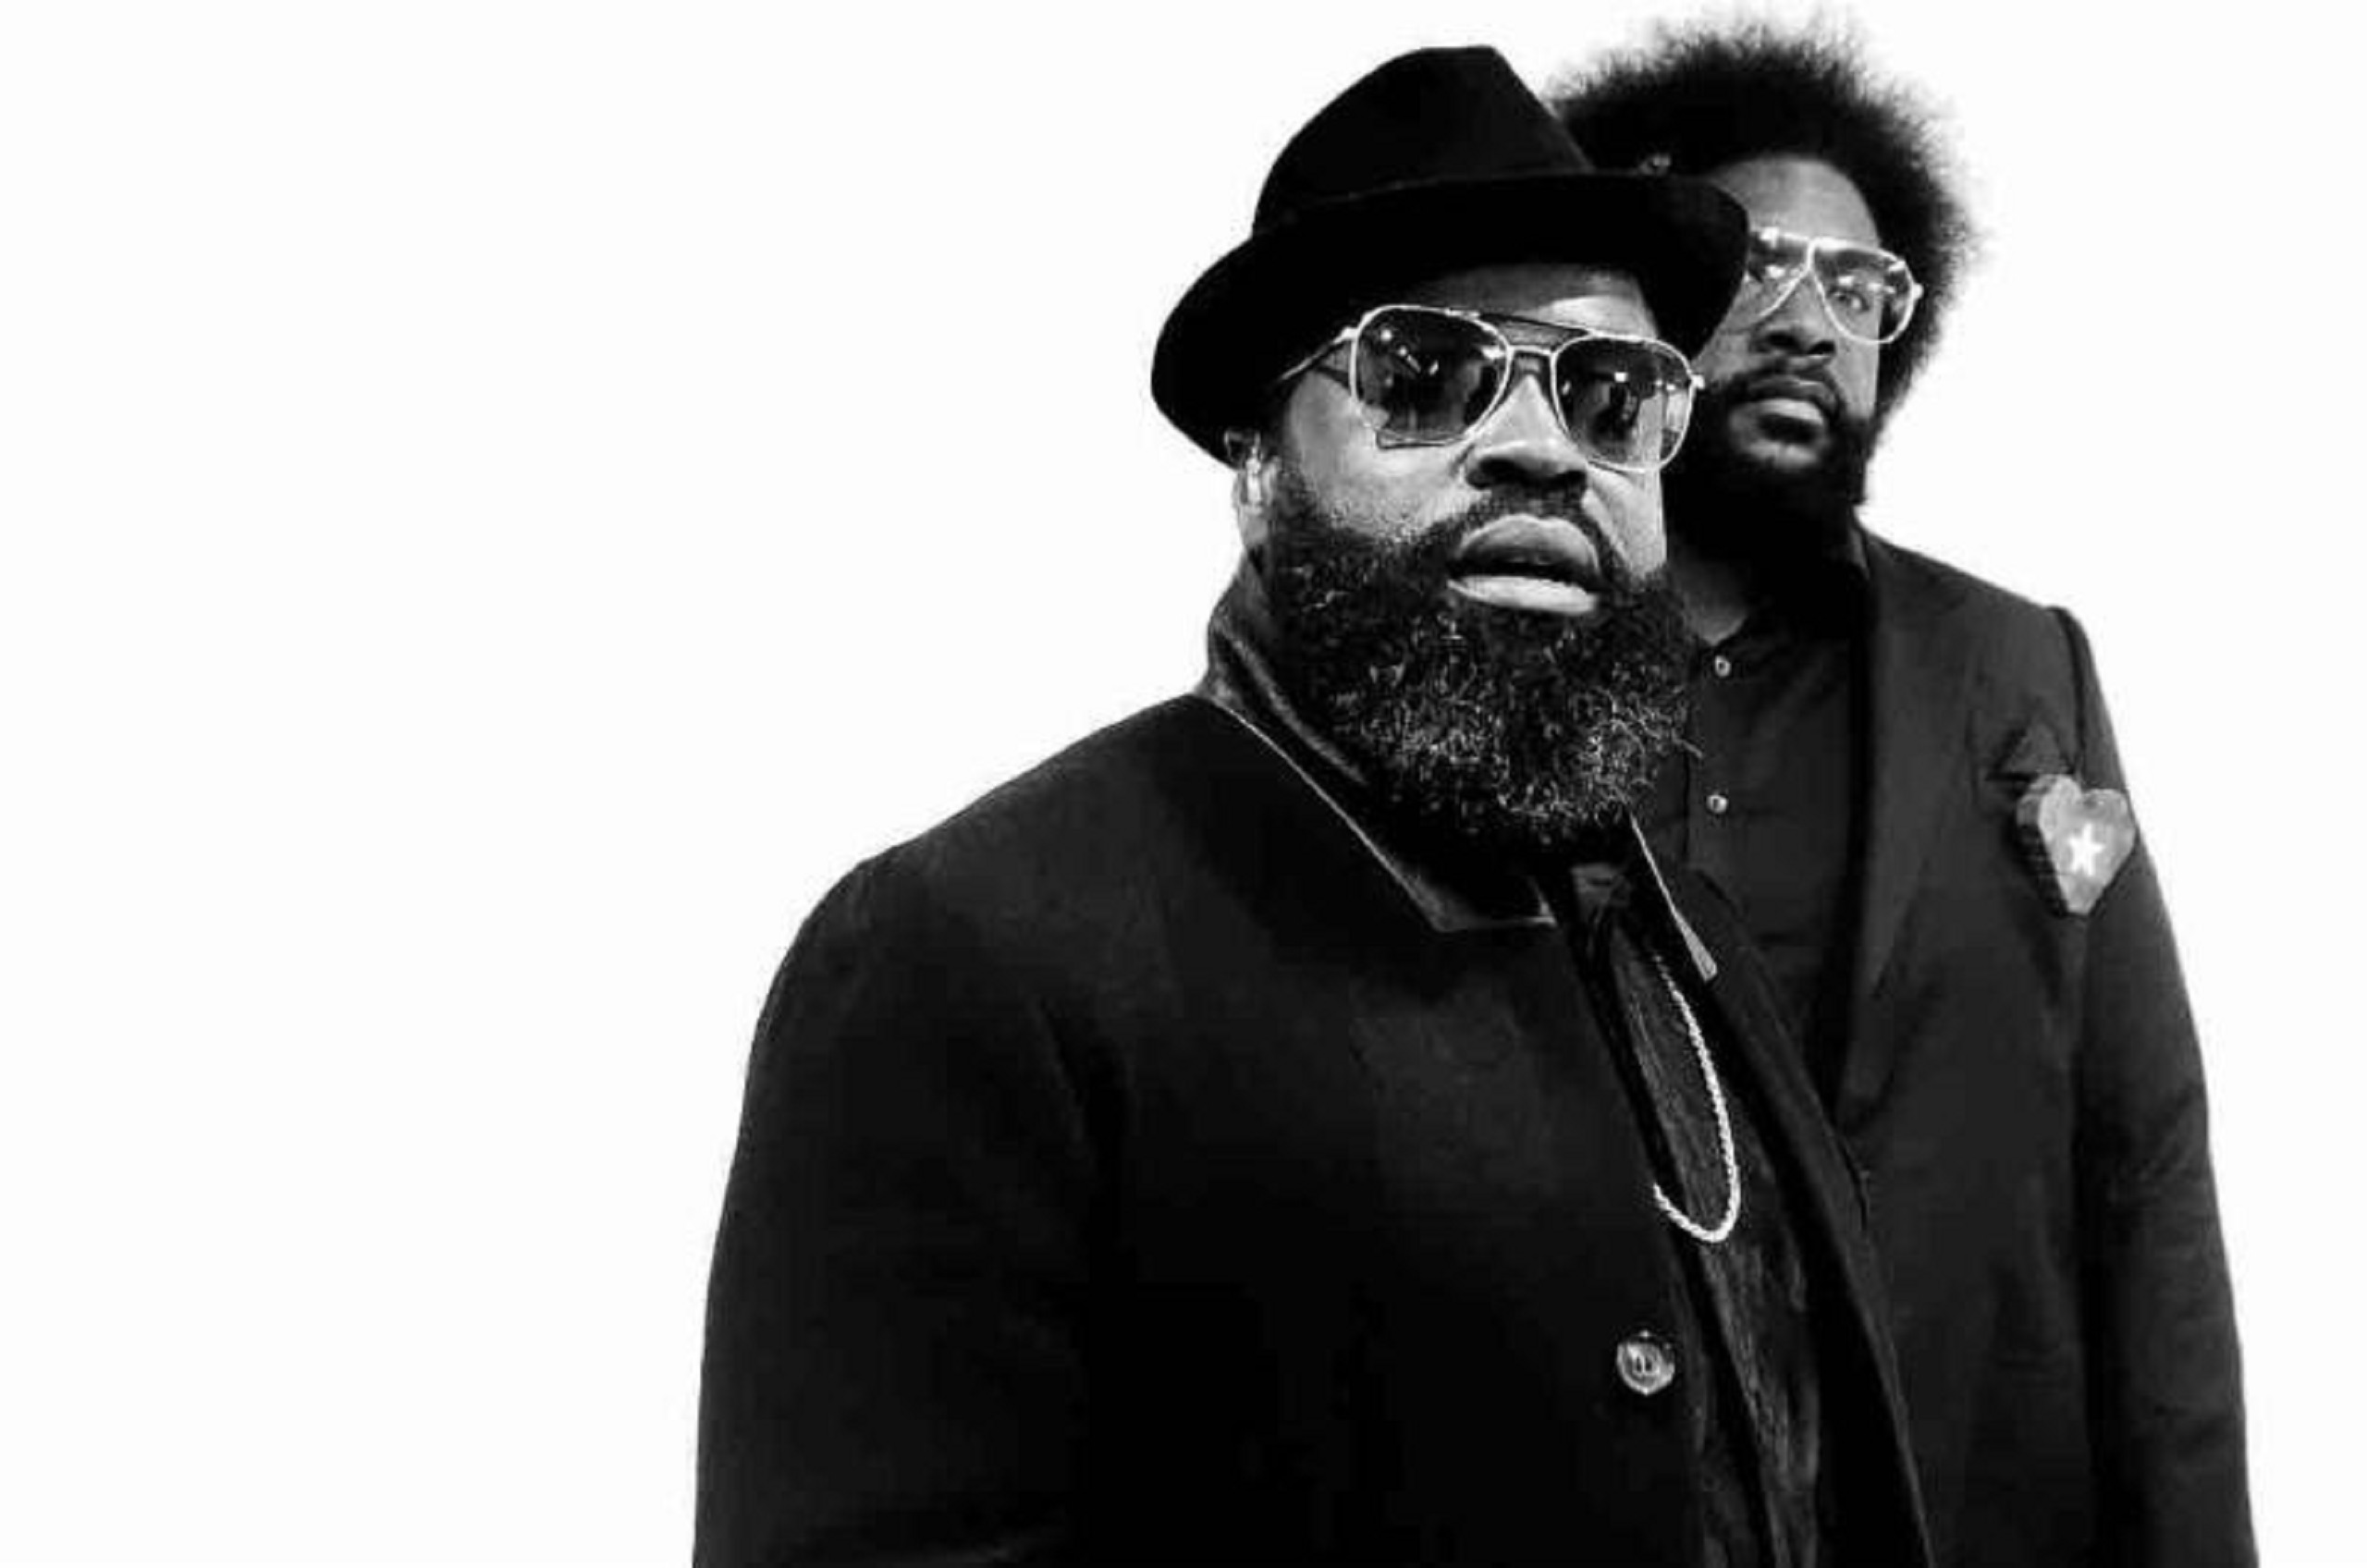 THE ROOTS TO PERFORM ON LATE NIGHT WITH SETH MEYERS TONIGHT